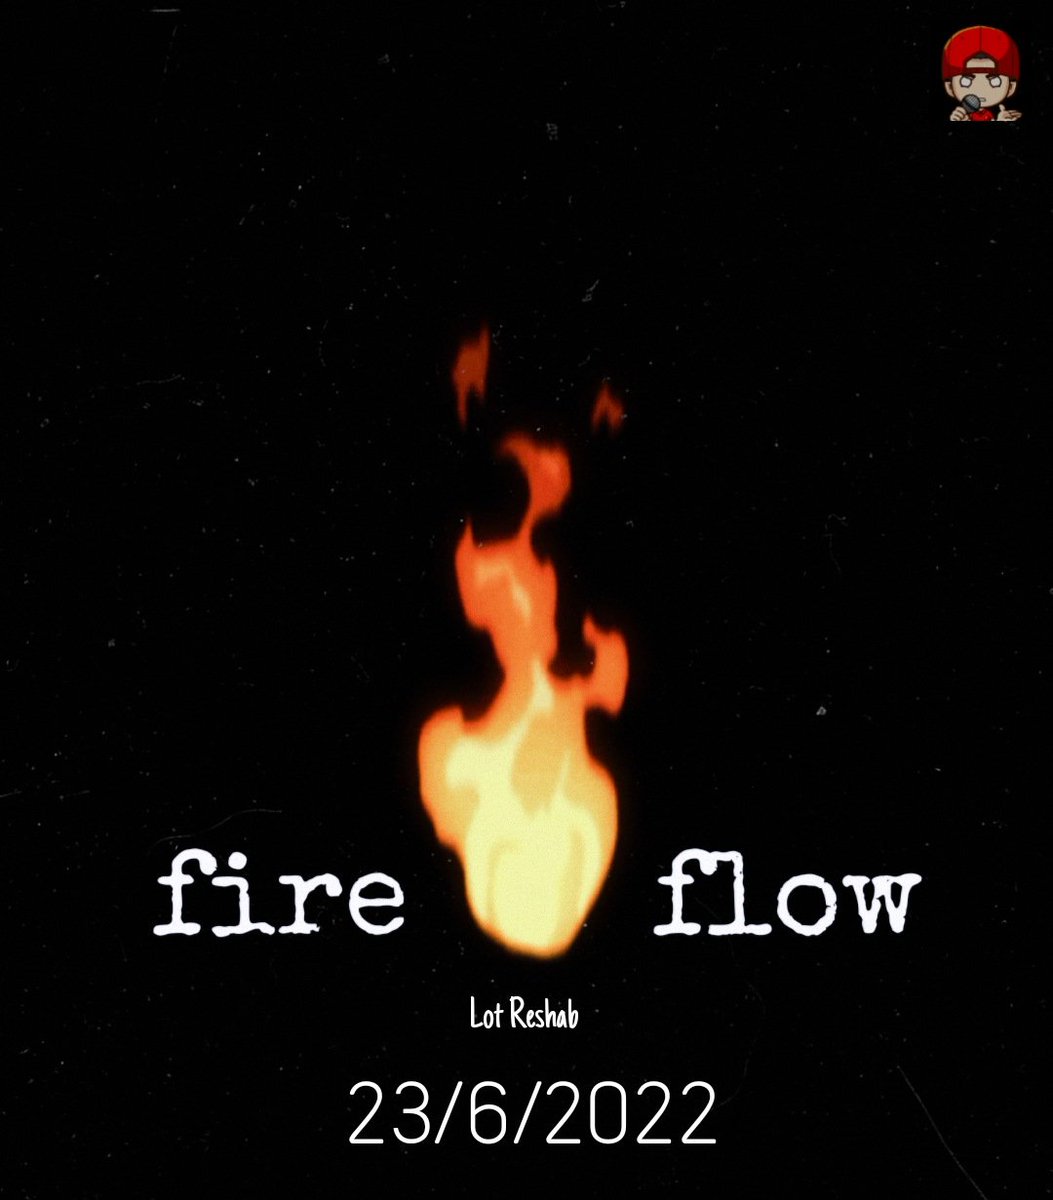 New rap 'Fire Flow'
Coming tomorrow #rap #hiphop #producer #trap #rapper #freestyle #studio #musicproducer #hiphopmusic #rnb #beatmaker #songwriter #drip #musicvideo #underground #drill #newartist #gang #beats #hiphopculture #dope #newmusic #worldstar #hiphopartist #upcomingrap